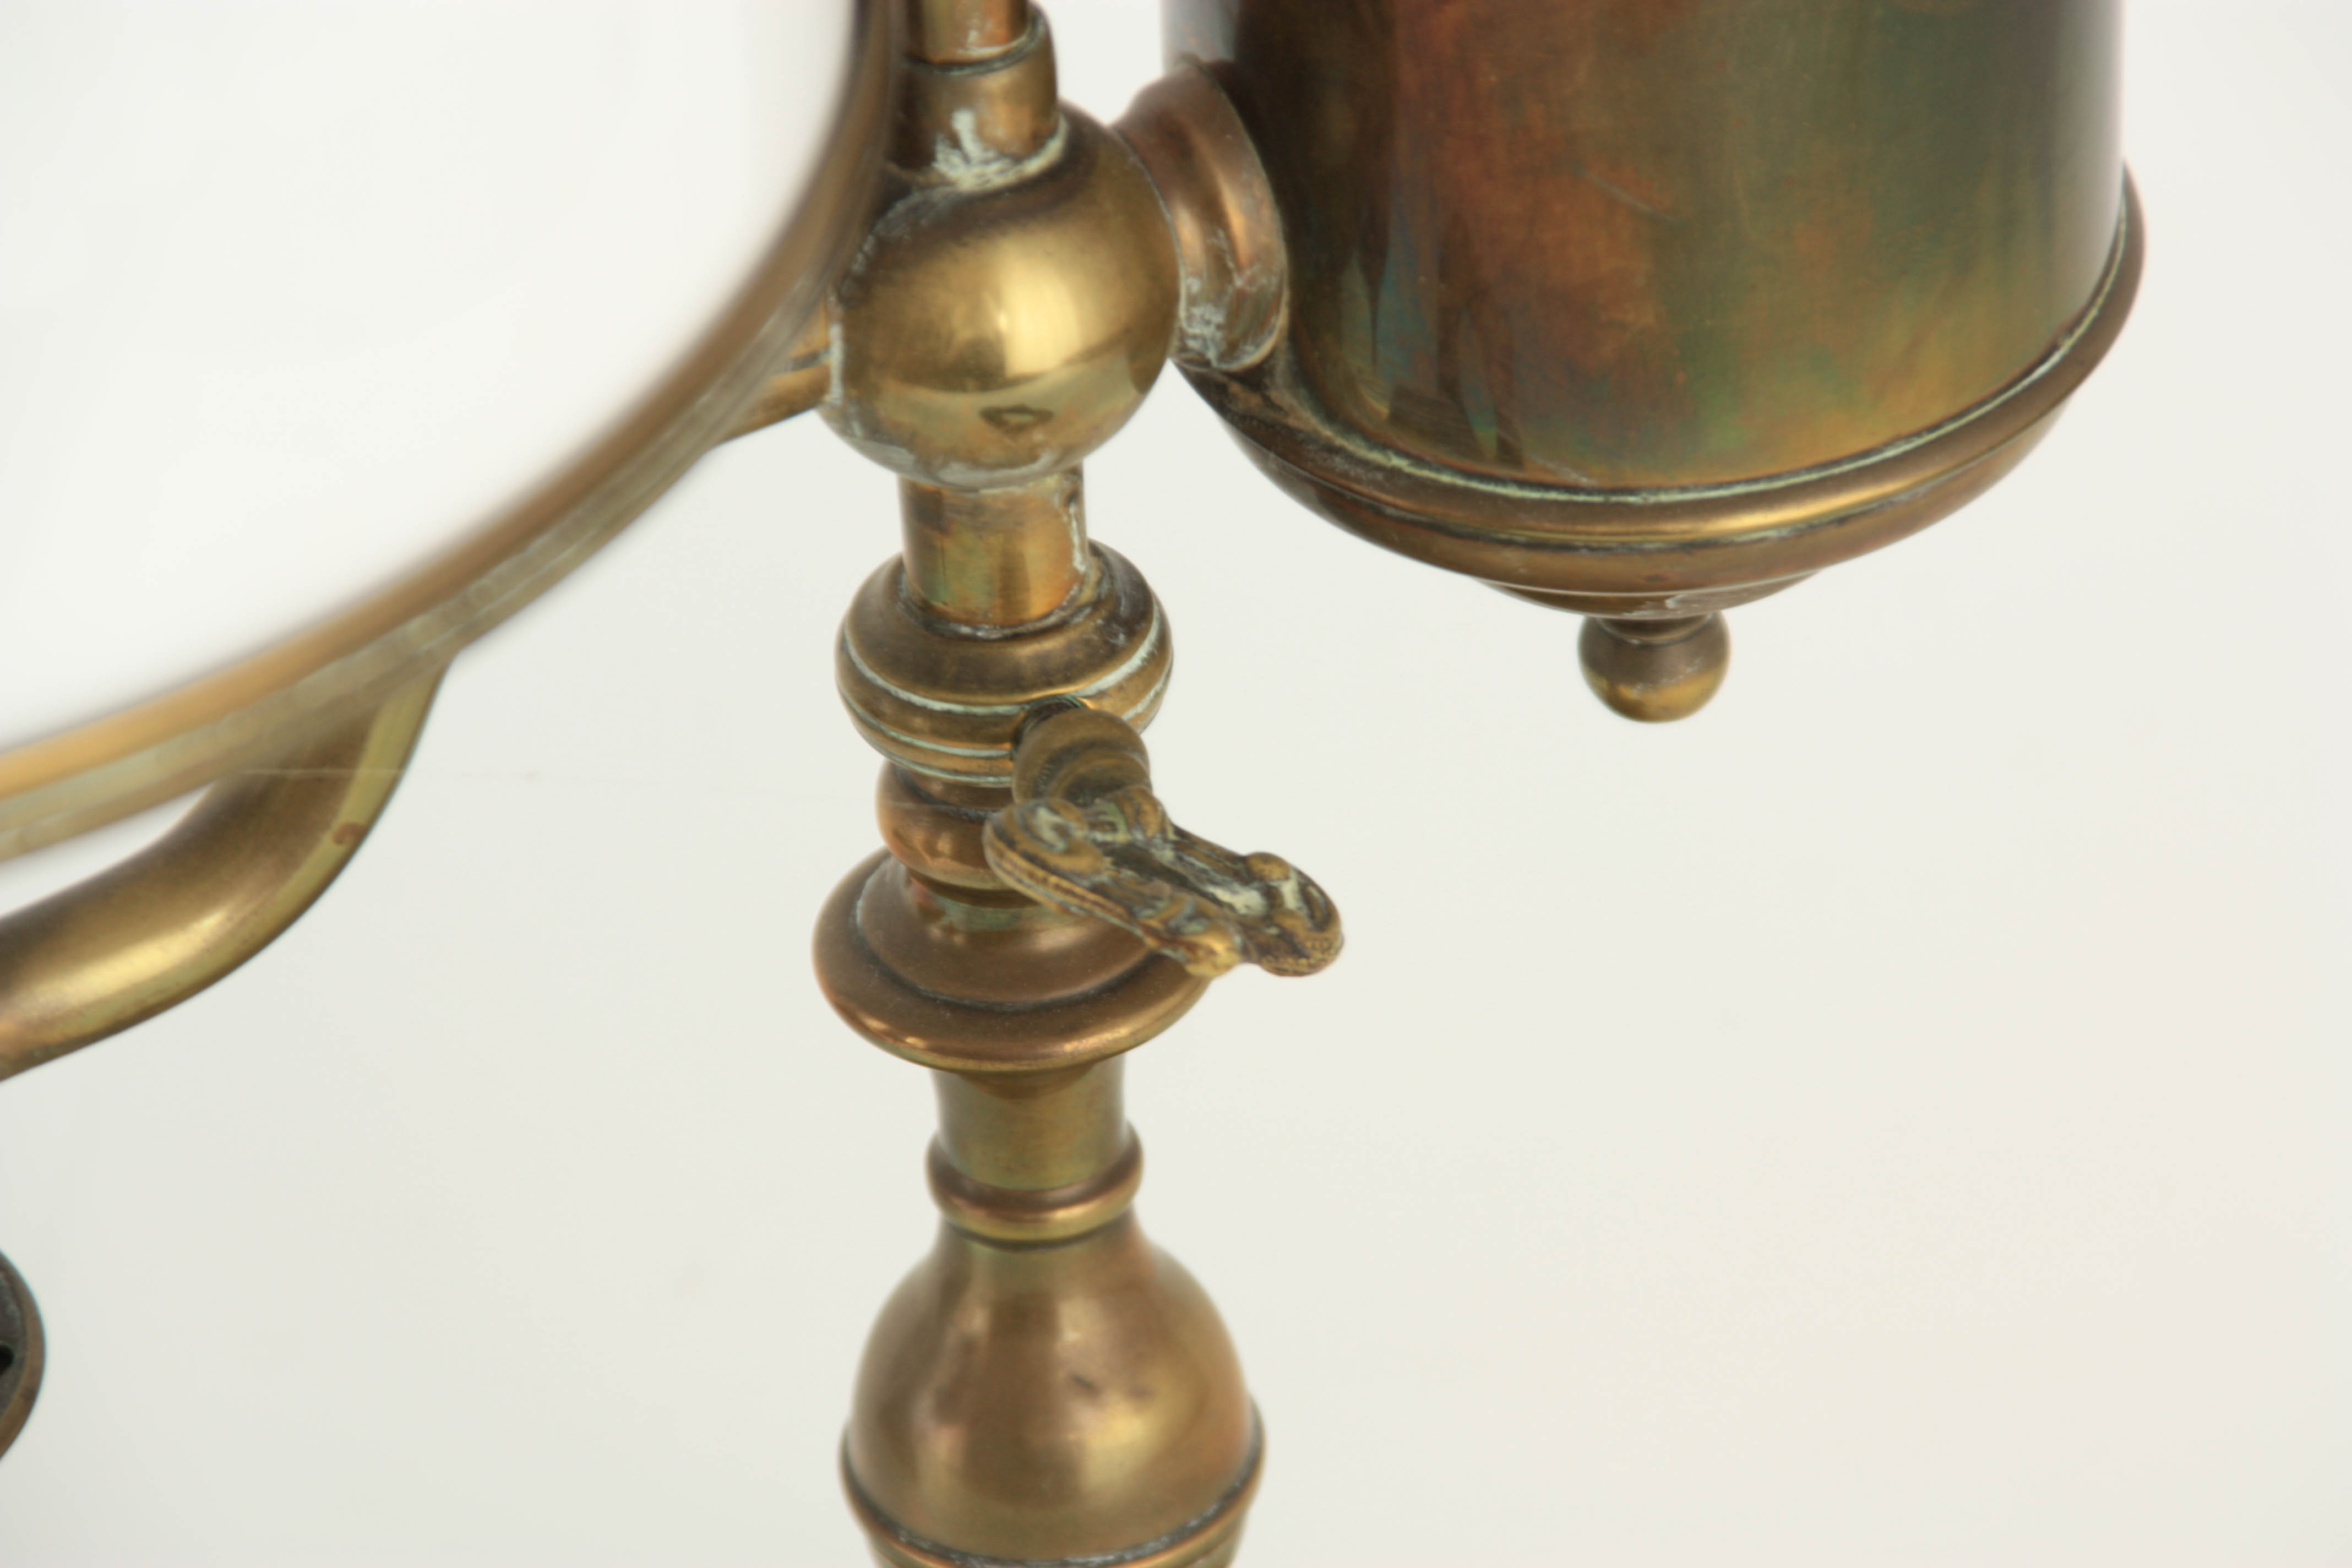 A VICTORIAN ORNATE CAST BRASS OIL LAMP with square footed pierced base, reeded leaf cast stem and - Image 5 of 5